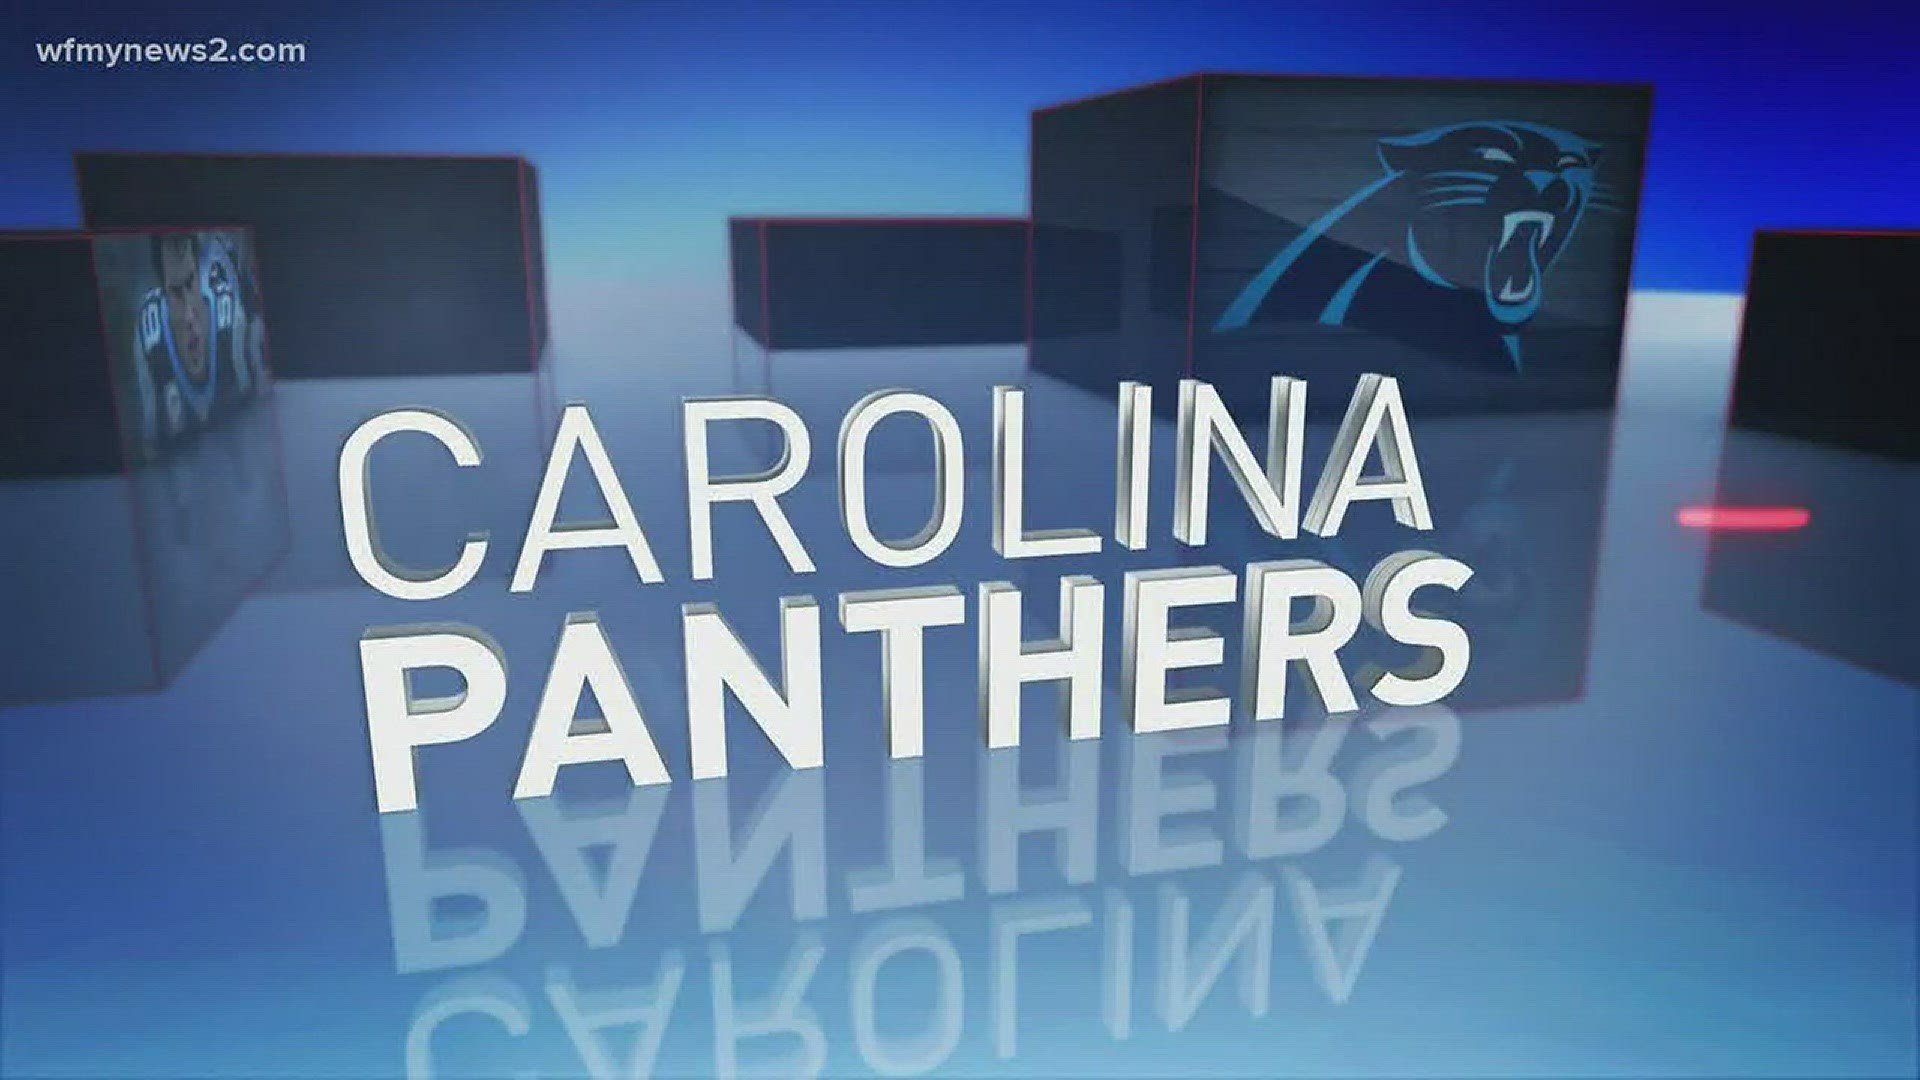 Panthers' Ownership Search Continues